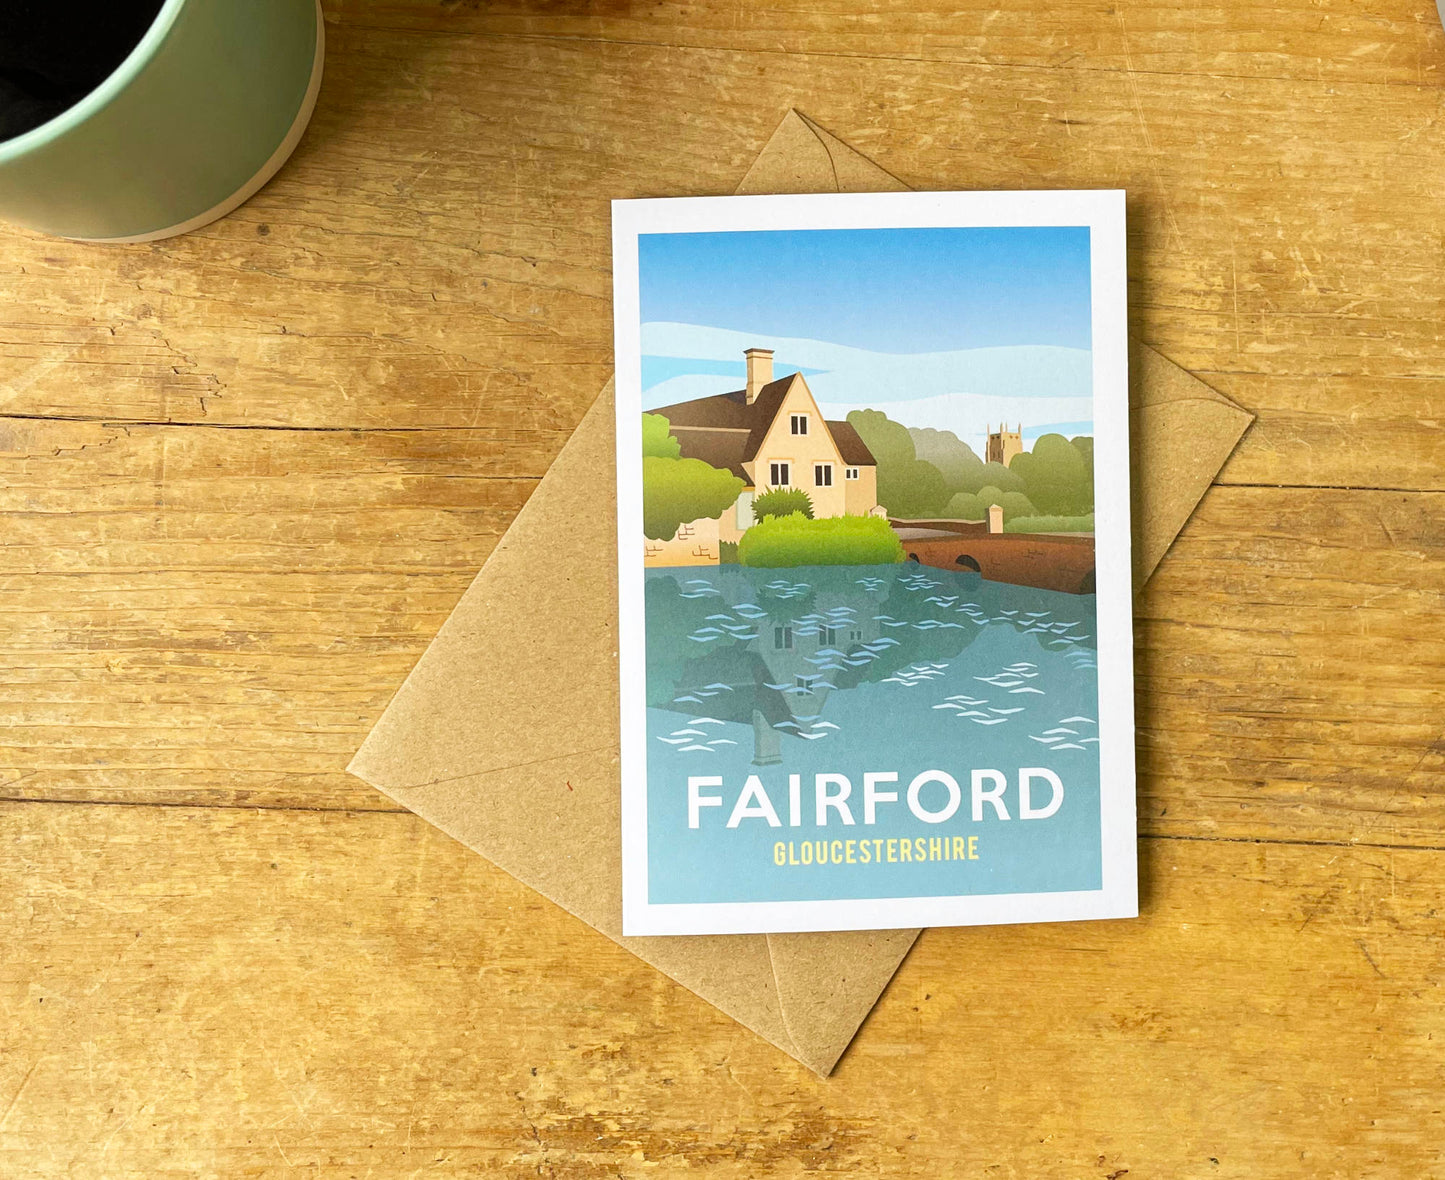 Fairford Mill Greeting Card on table